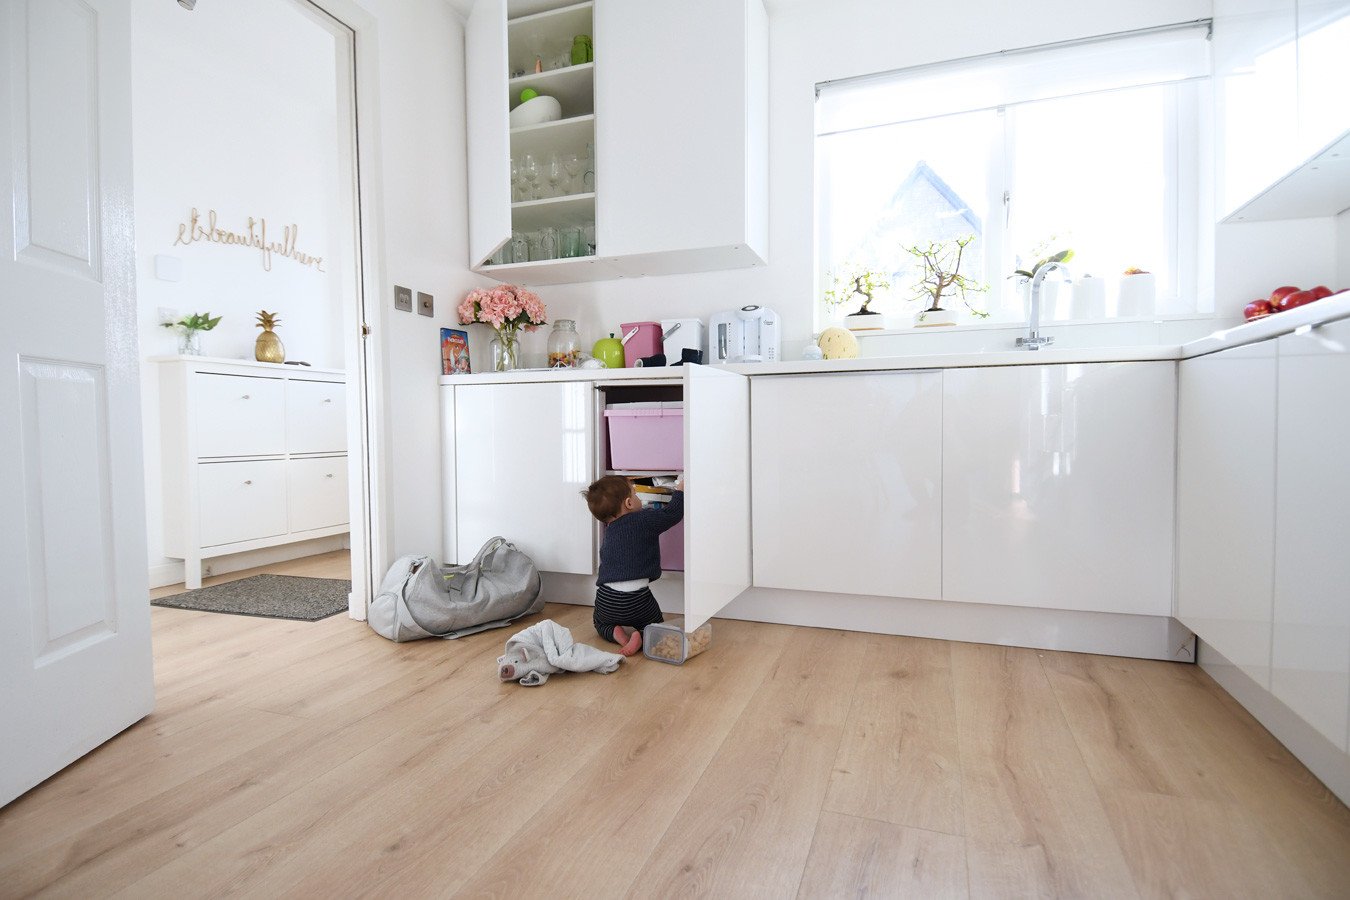 baby rifling through the kitchen cupboards